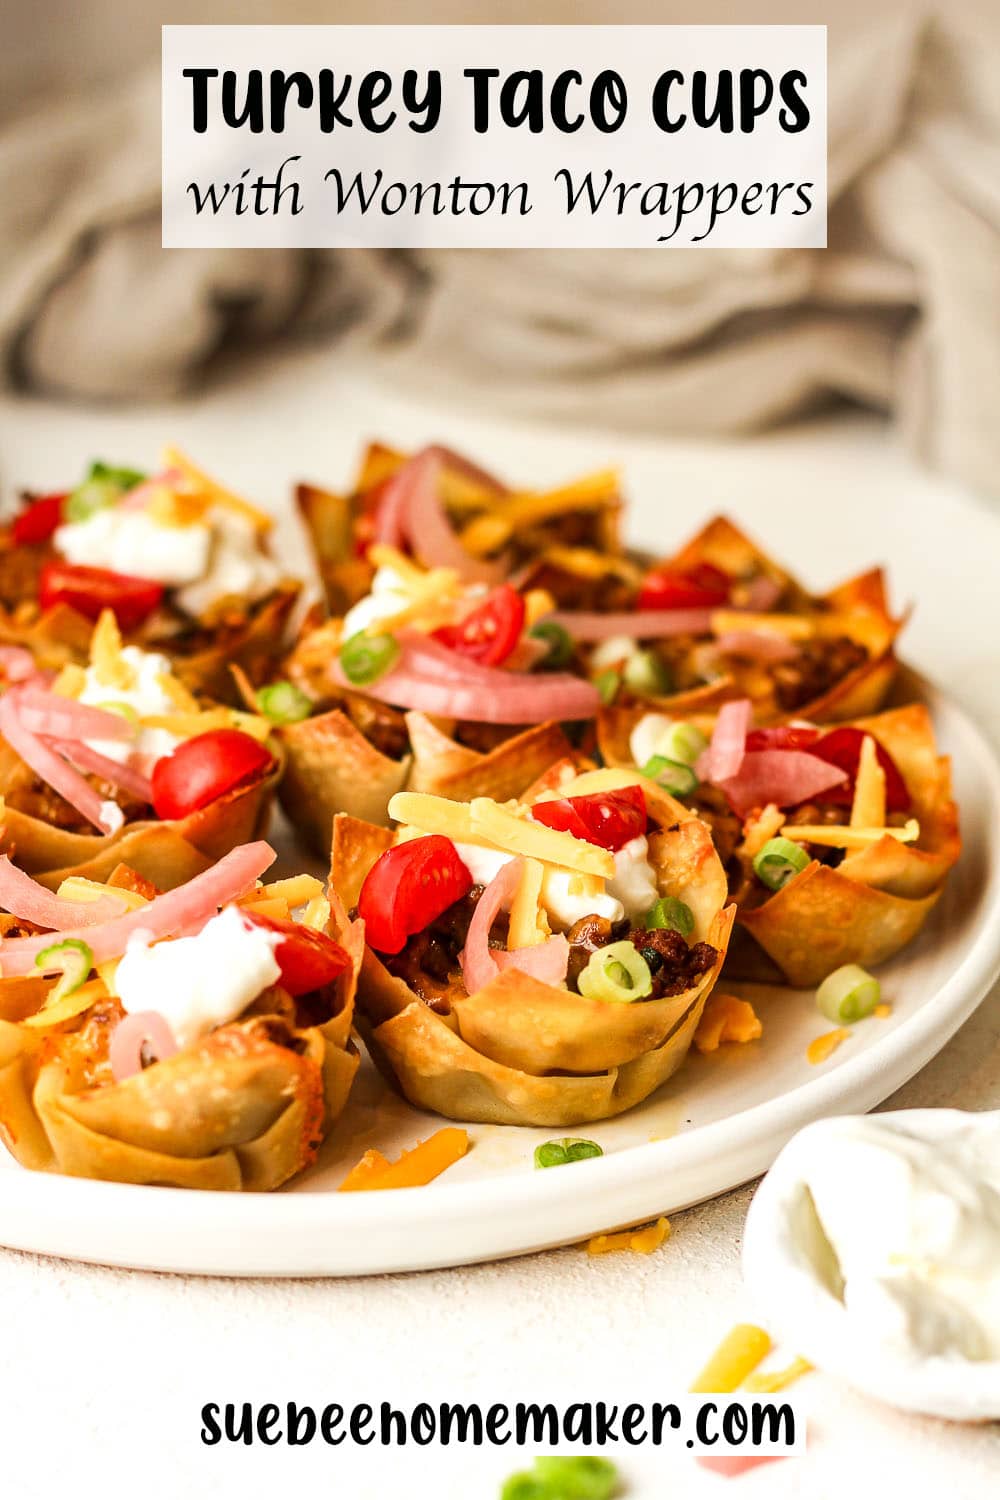 A plate of turkey taco cups with toppings.